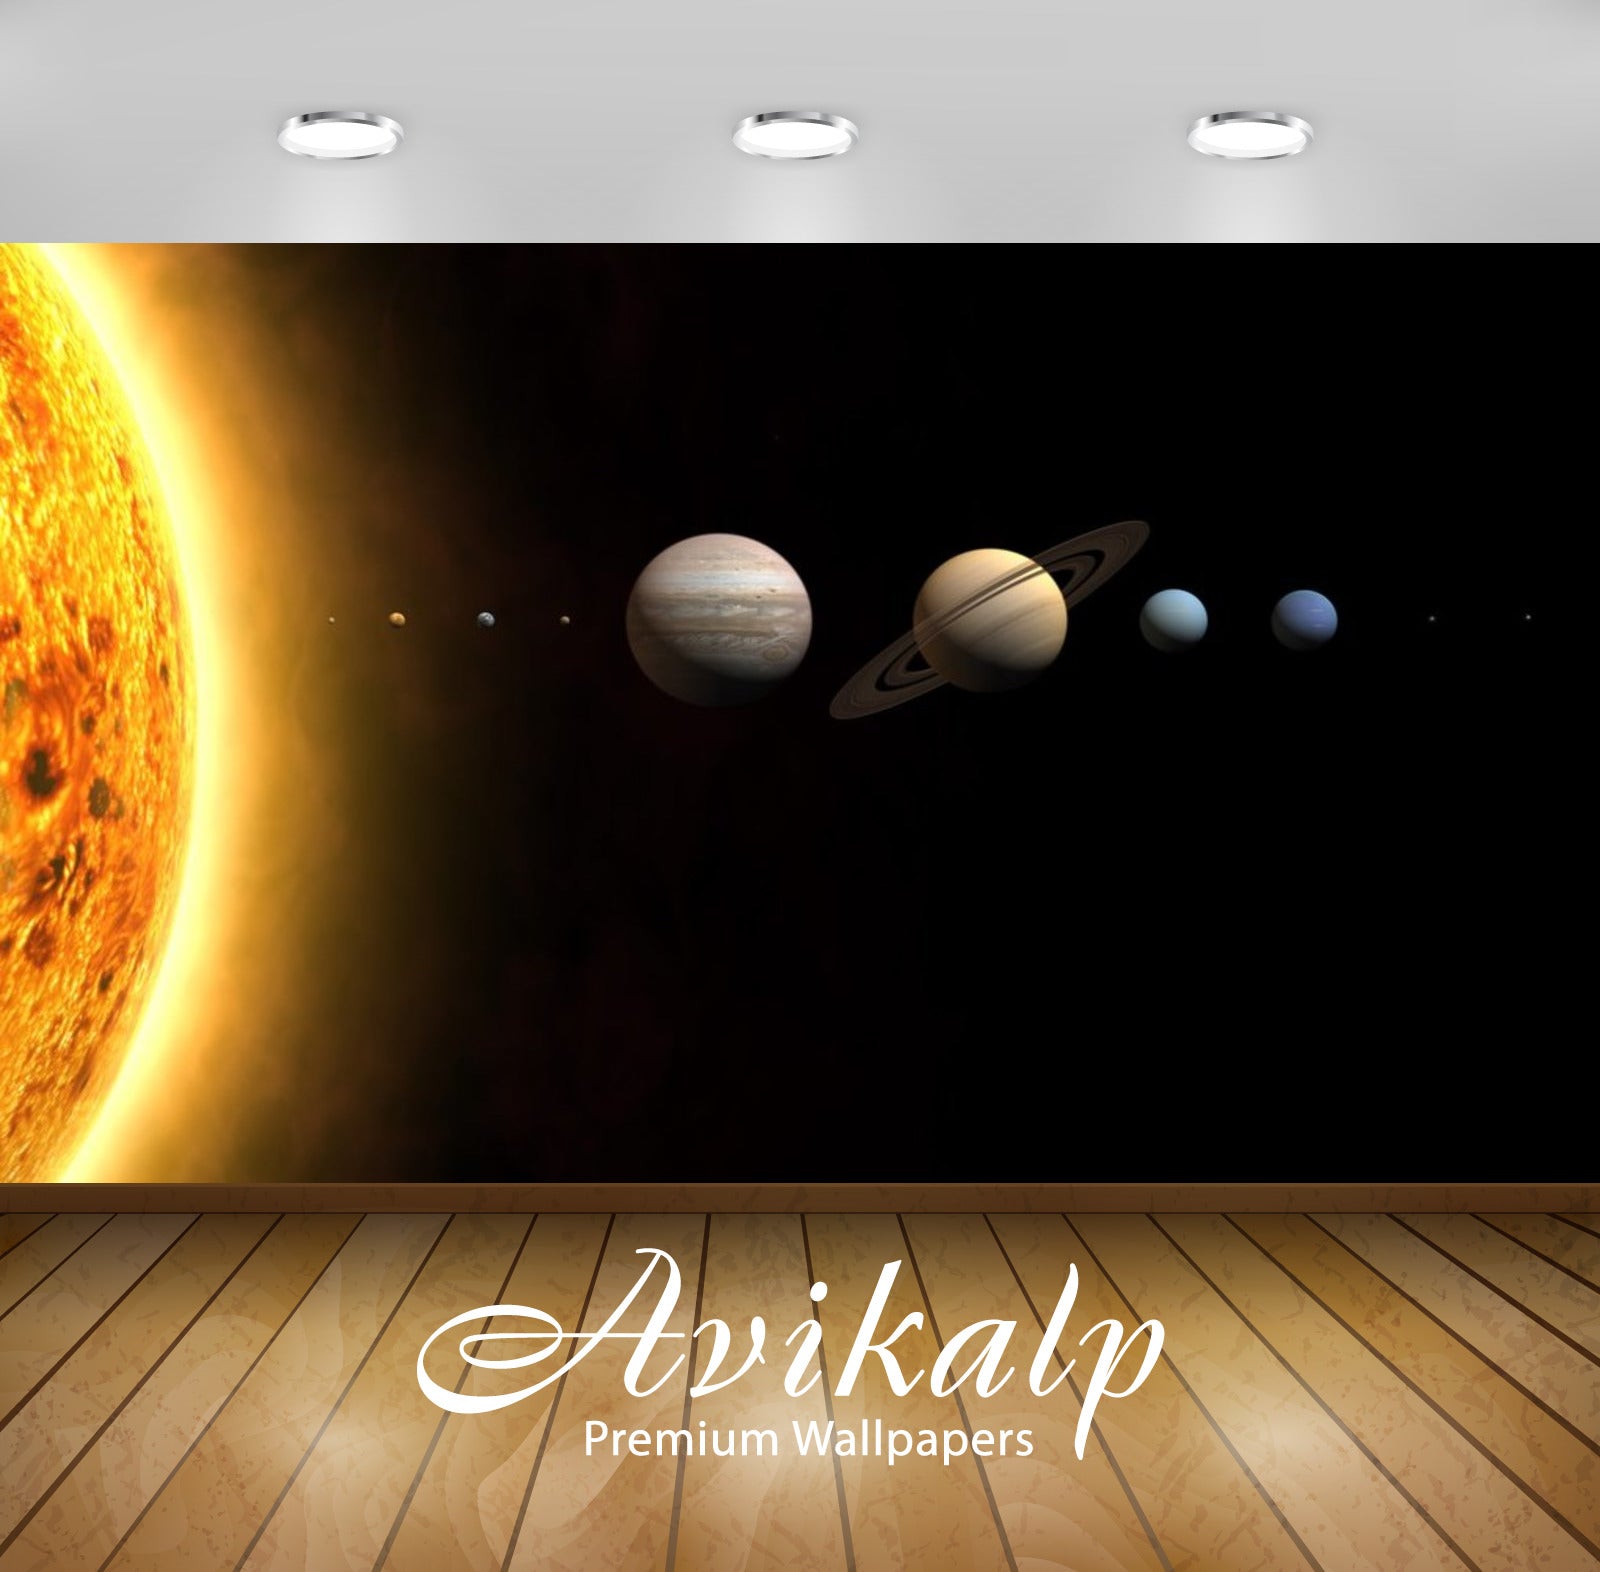 Avikalp Exclusive Planets Sun AWI1179 HD Wallpapers for Living room, Hall, Kids Room, Kitchen, TV Ba